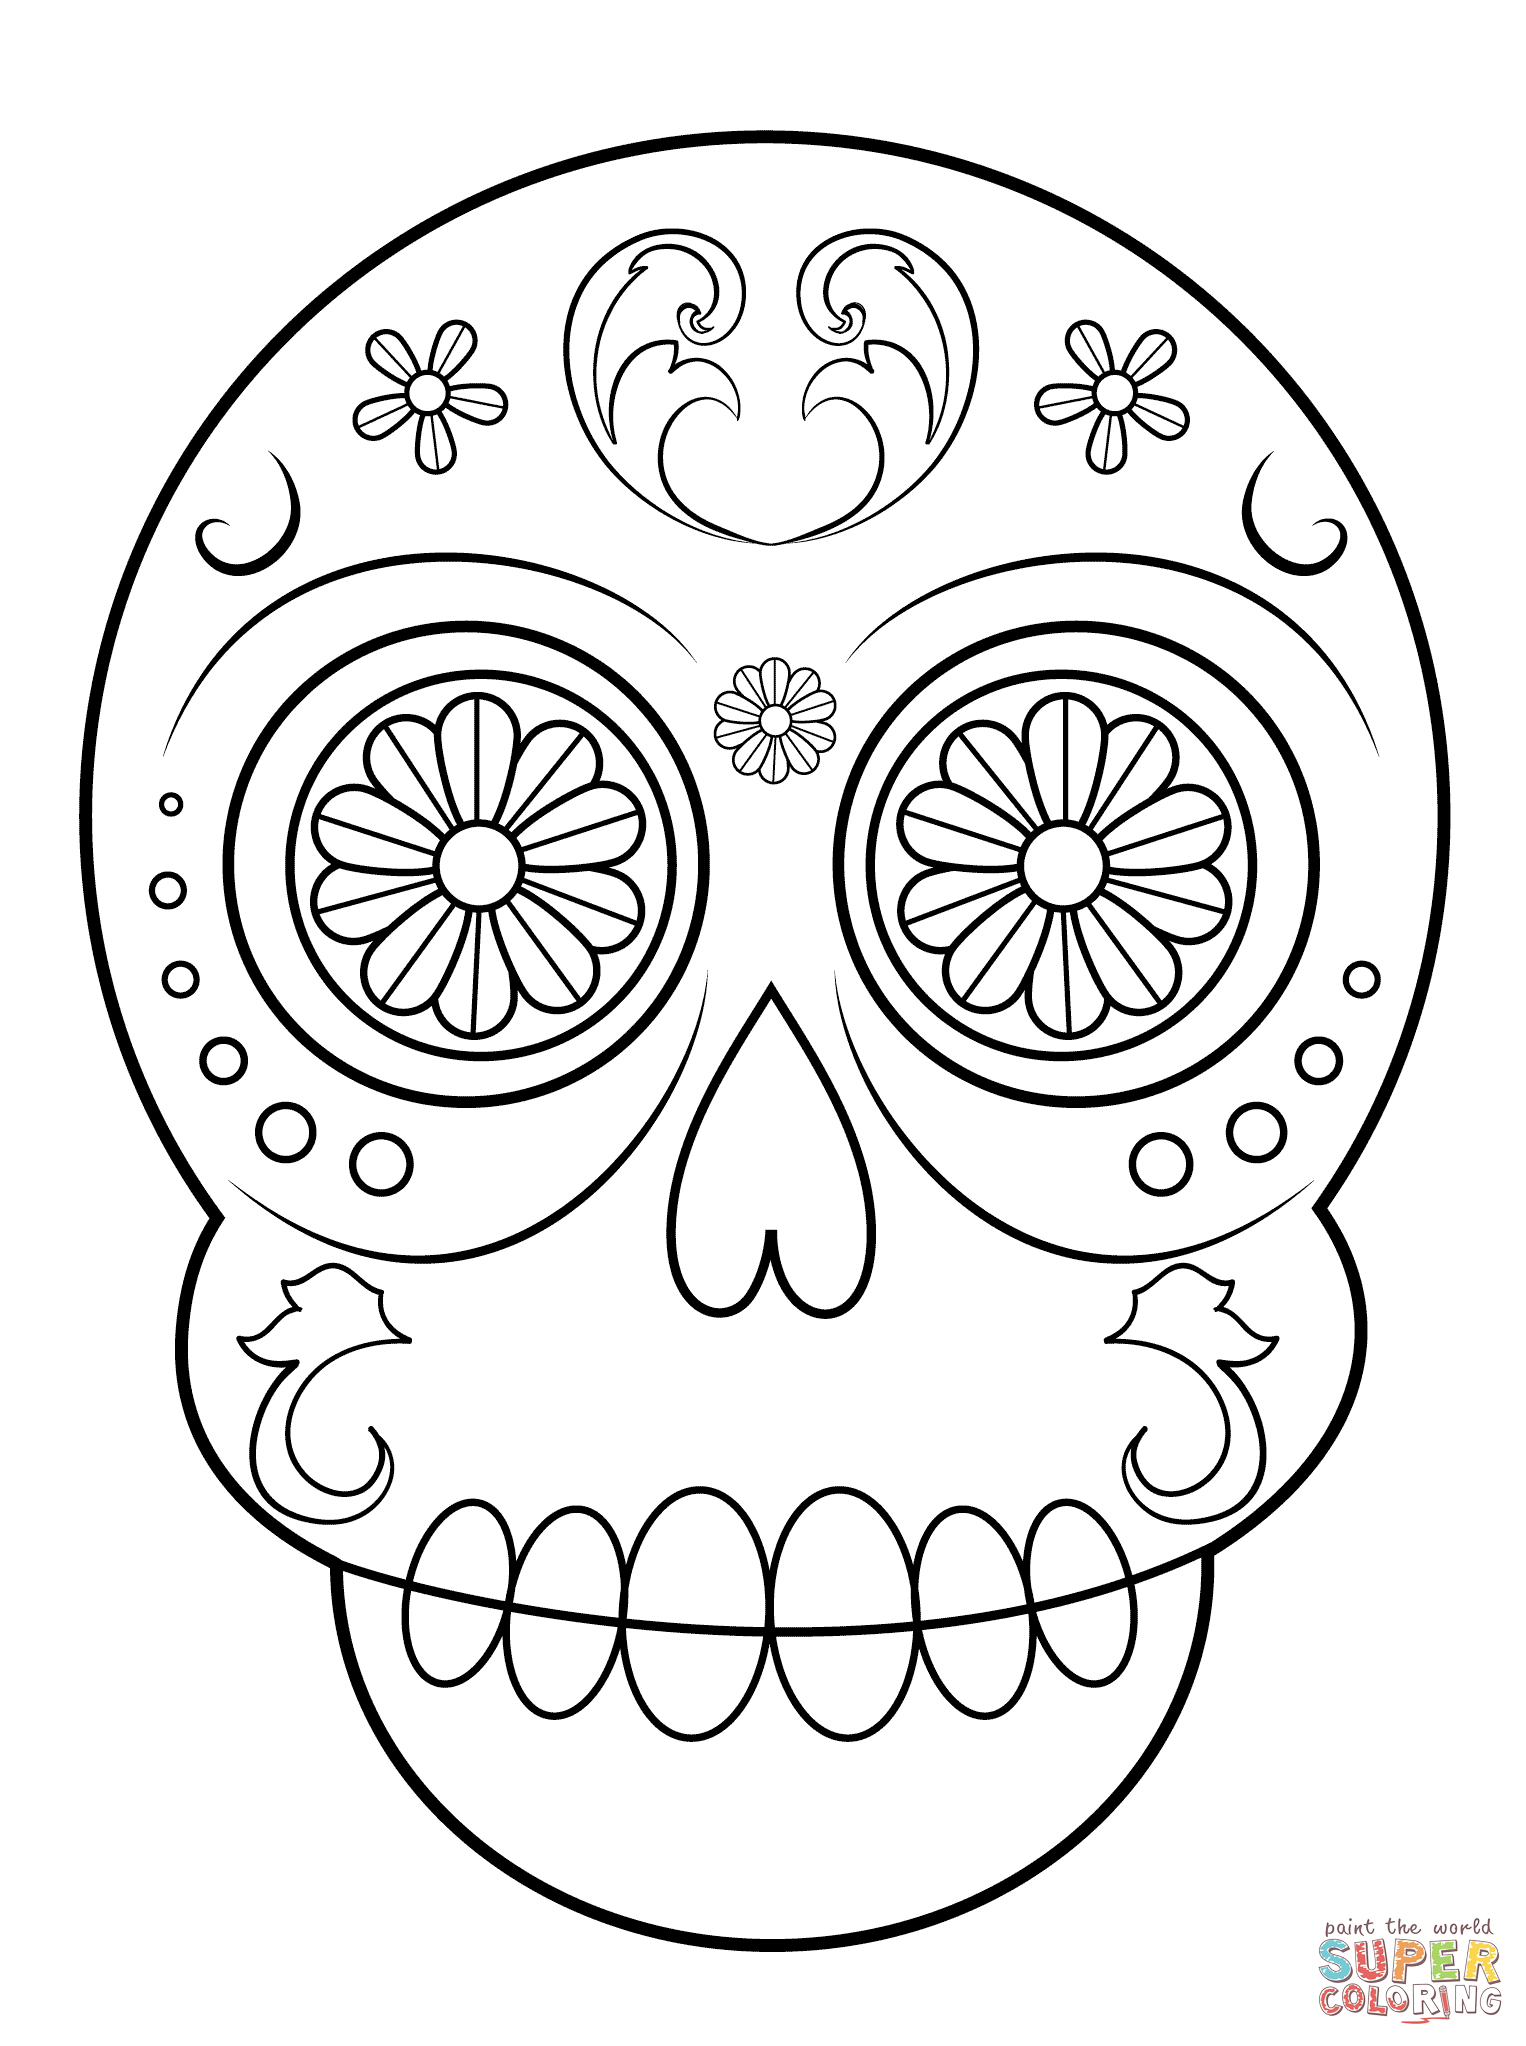 Simple Sugar Skull Coloring Page | Free Printable Coloring Pages - Free Printable Day Of The Dead Coloring Pages